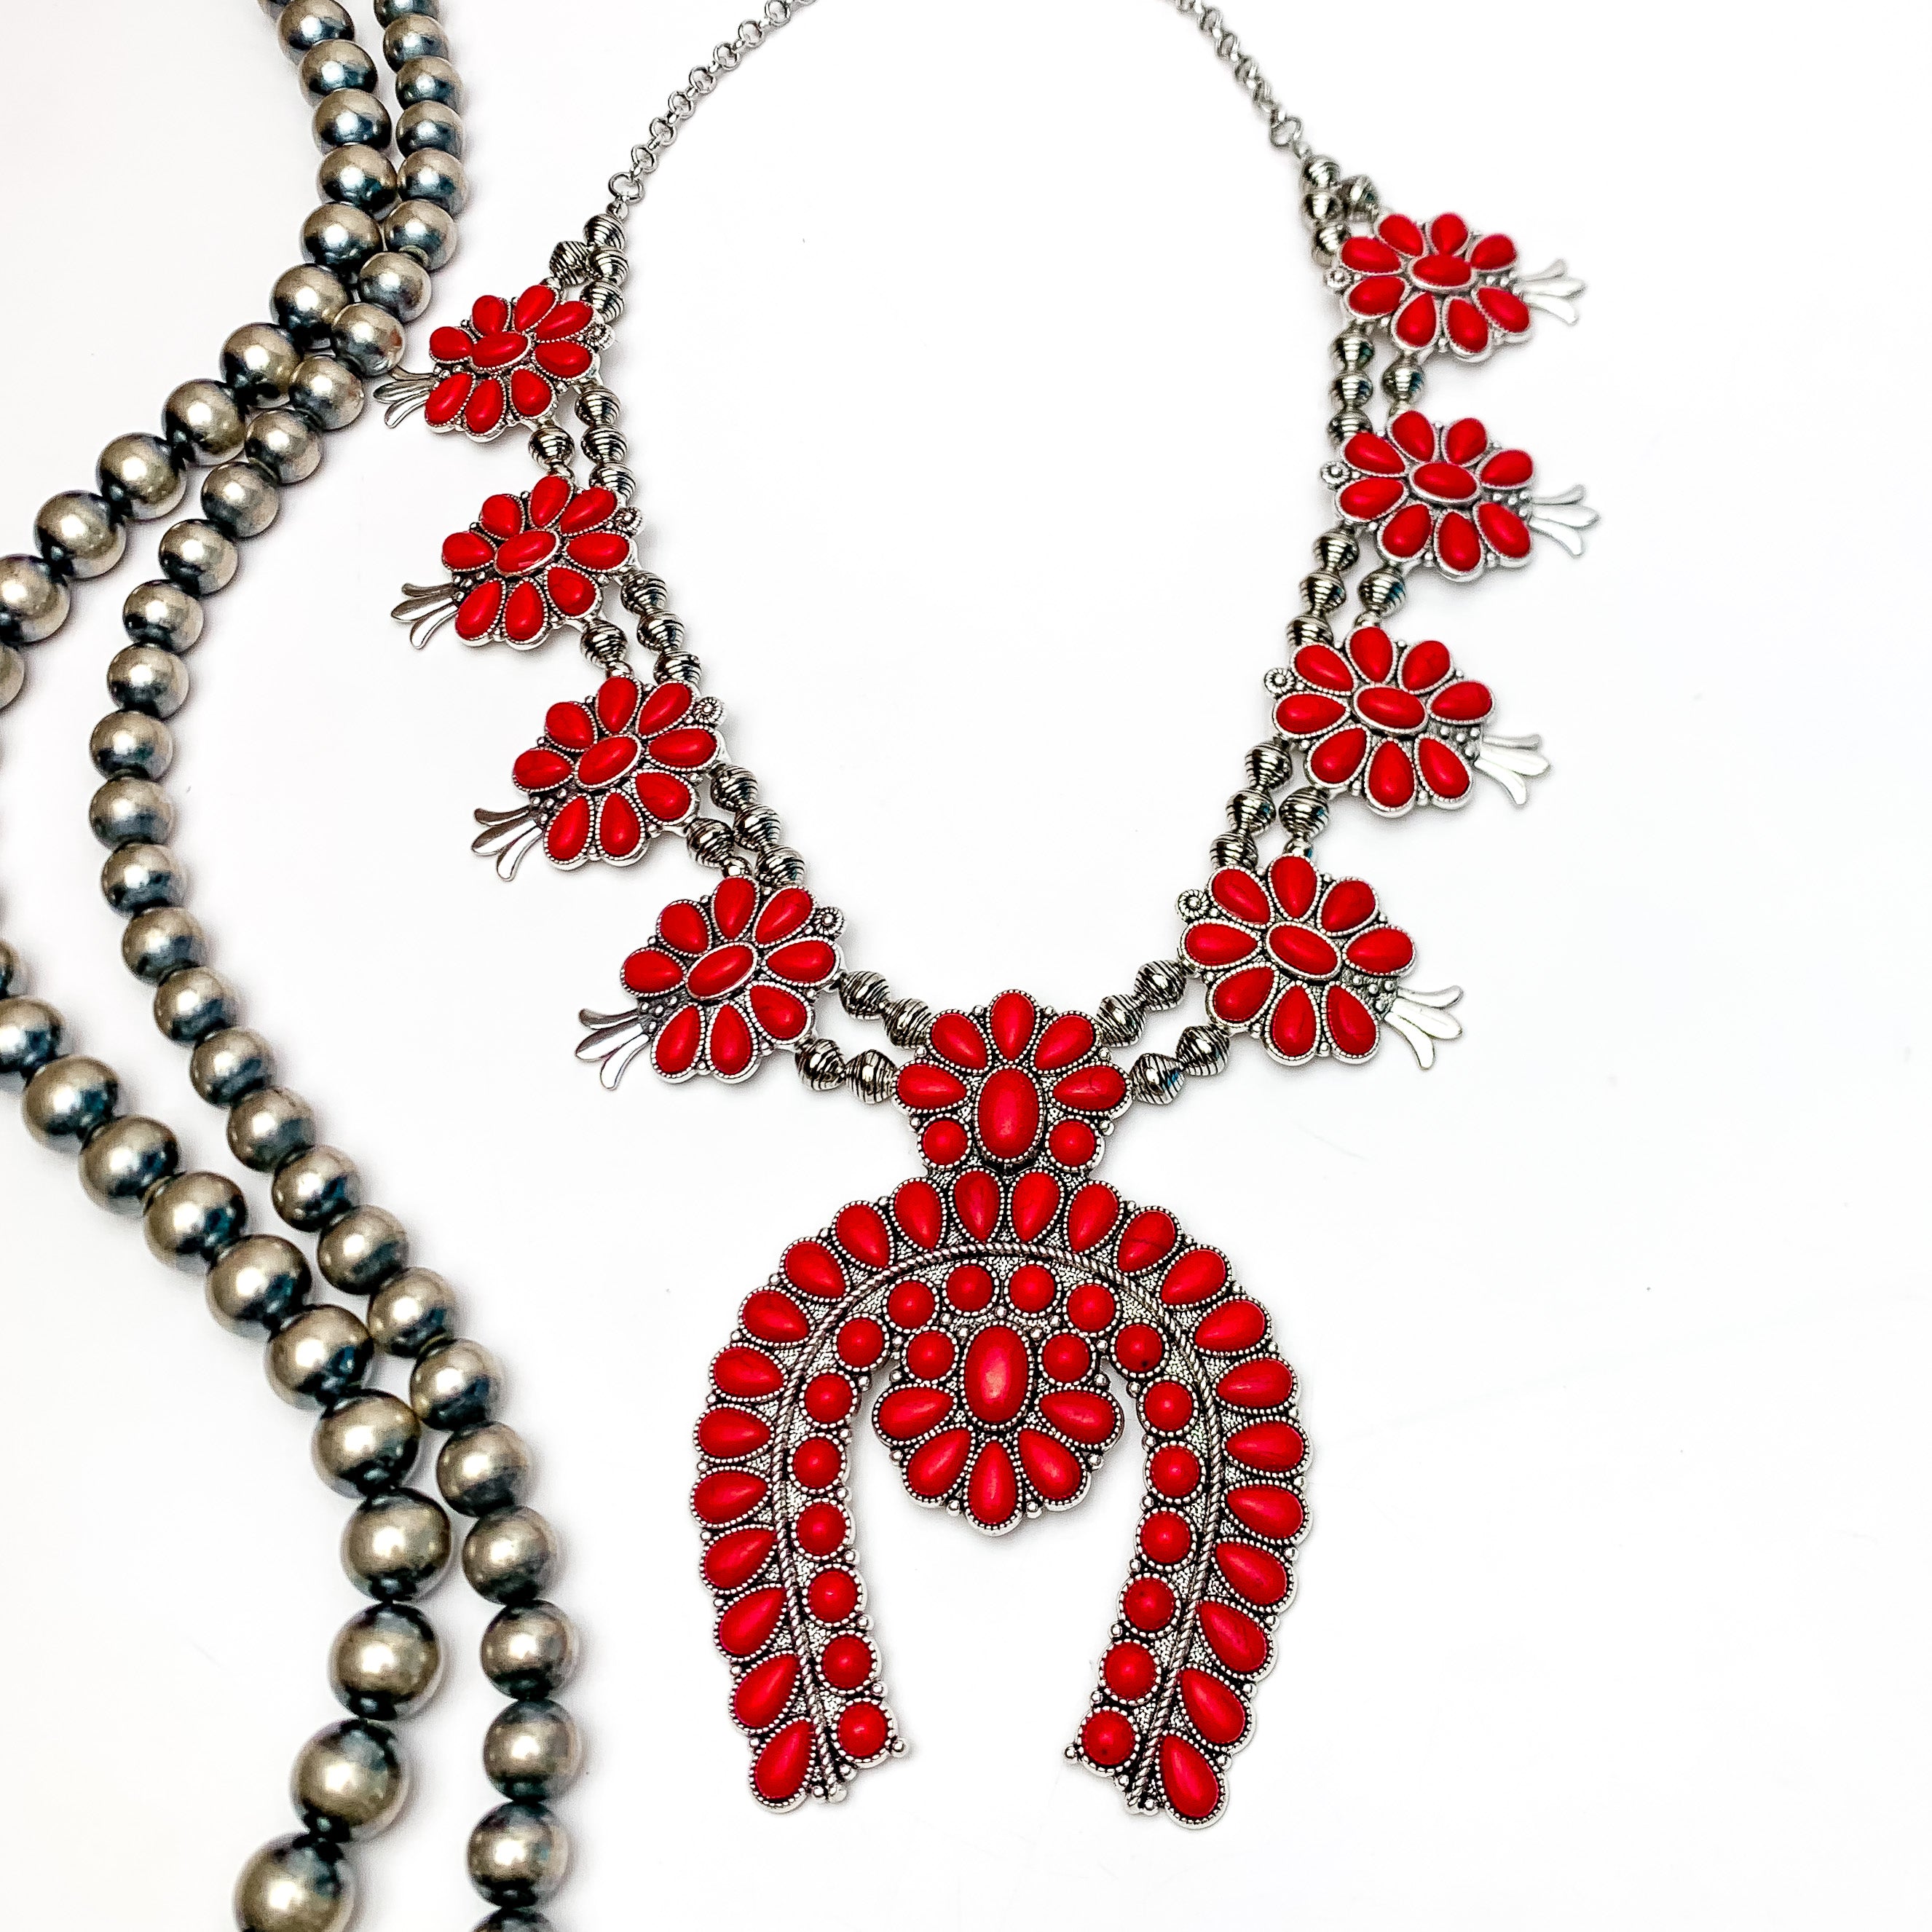 Western Women Squash Blossom Necklace in Red. Pictured on a white background with Navajo beads on the left side.